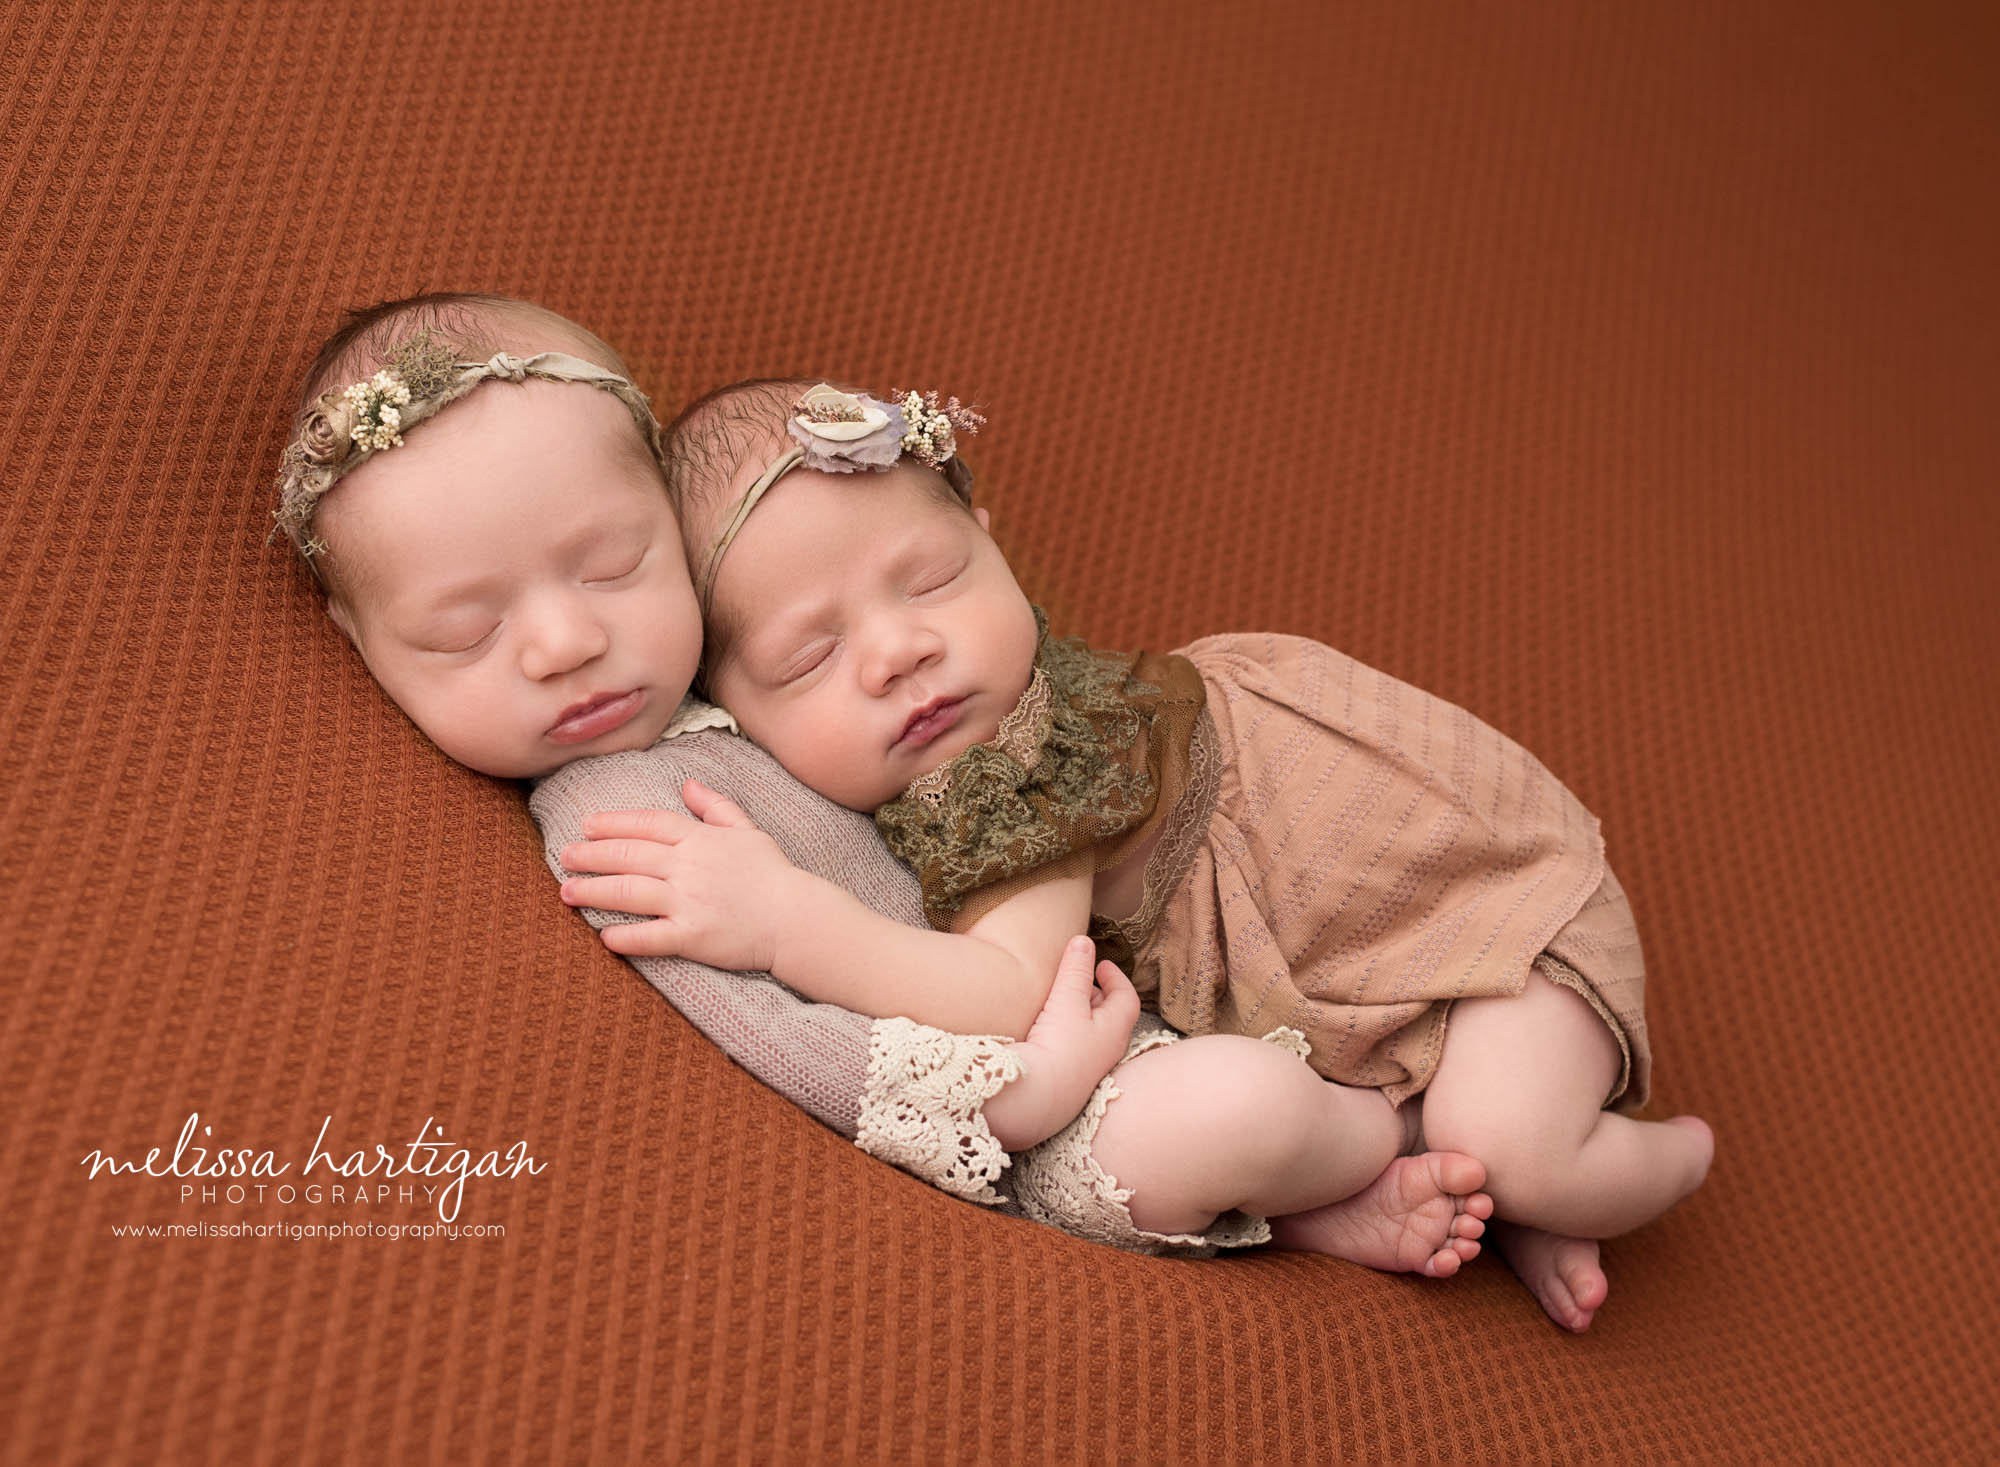 twin newborn baby girls posed together wearing outfits CT newborn Photography